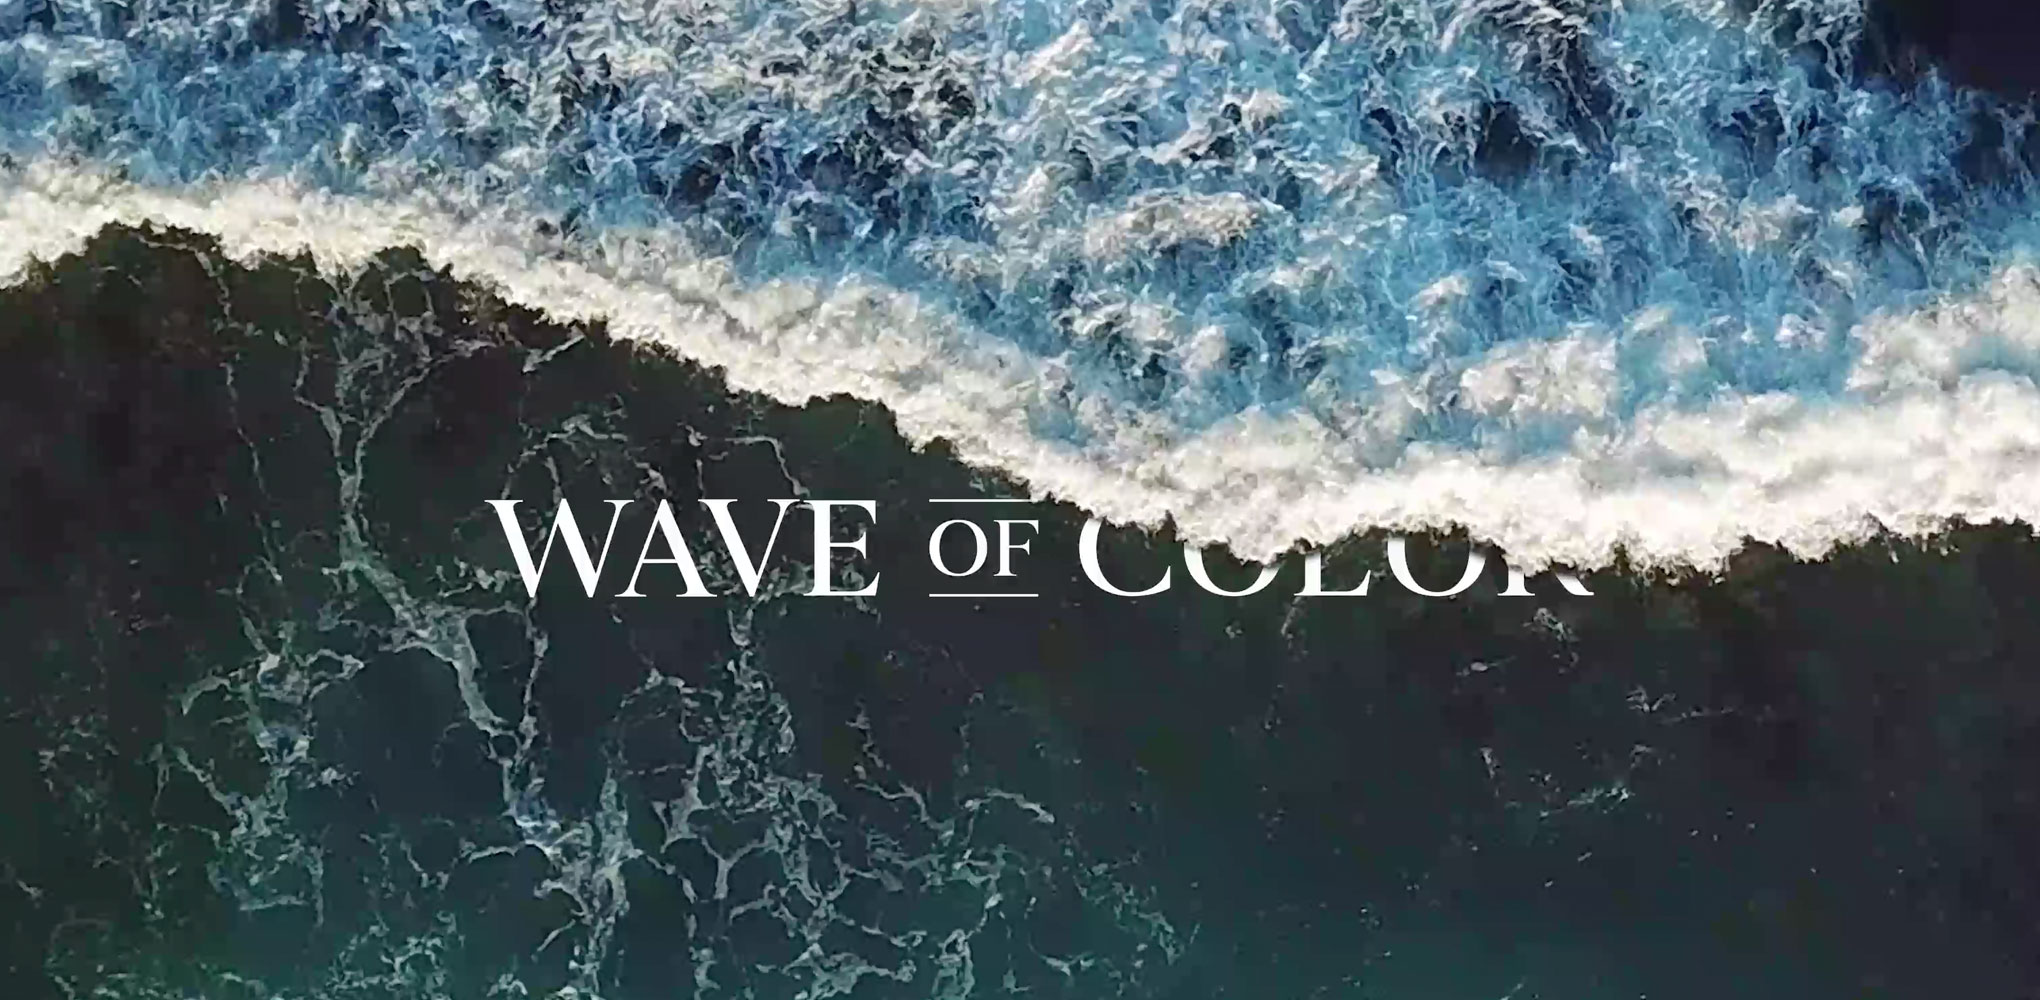 WINDSURFERS Videowettbewerb 2021 presented by Lumix: Marco Herbst - Wave of Color